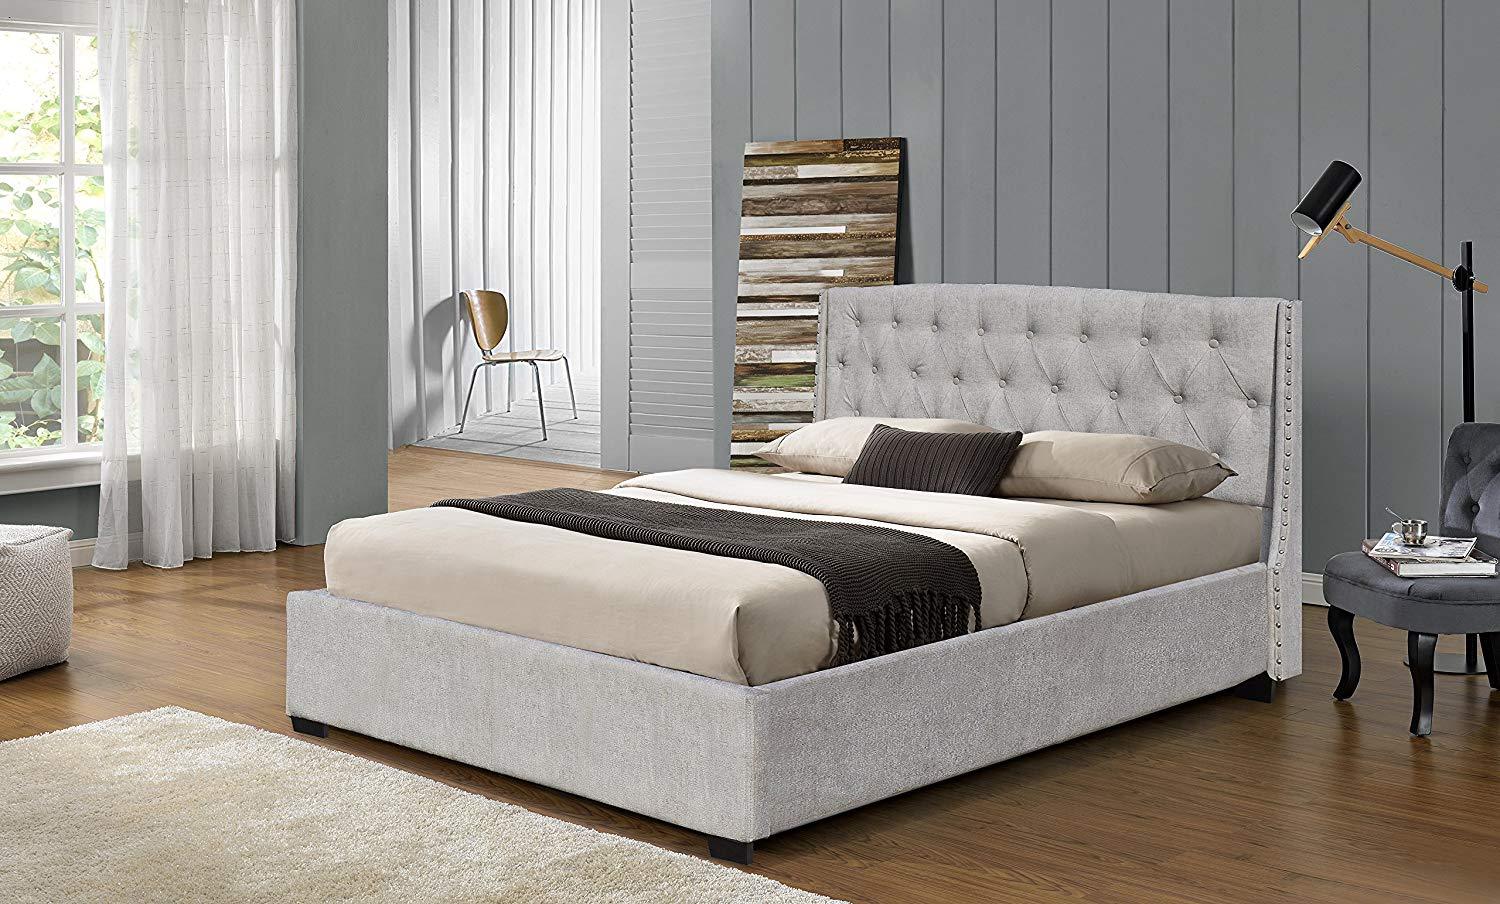 Cherry Tree Furniture LUCIDA Chenille Fabric Buttoned Headboard Bed Frame in Light Grey SF852 Standard, 4FT6 Double